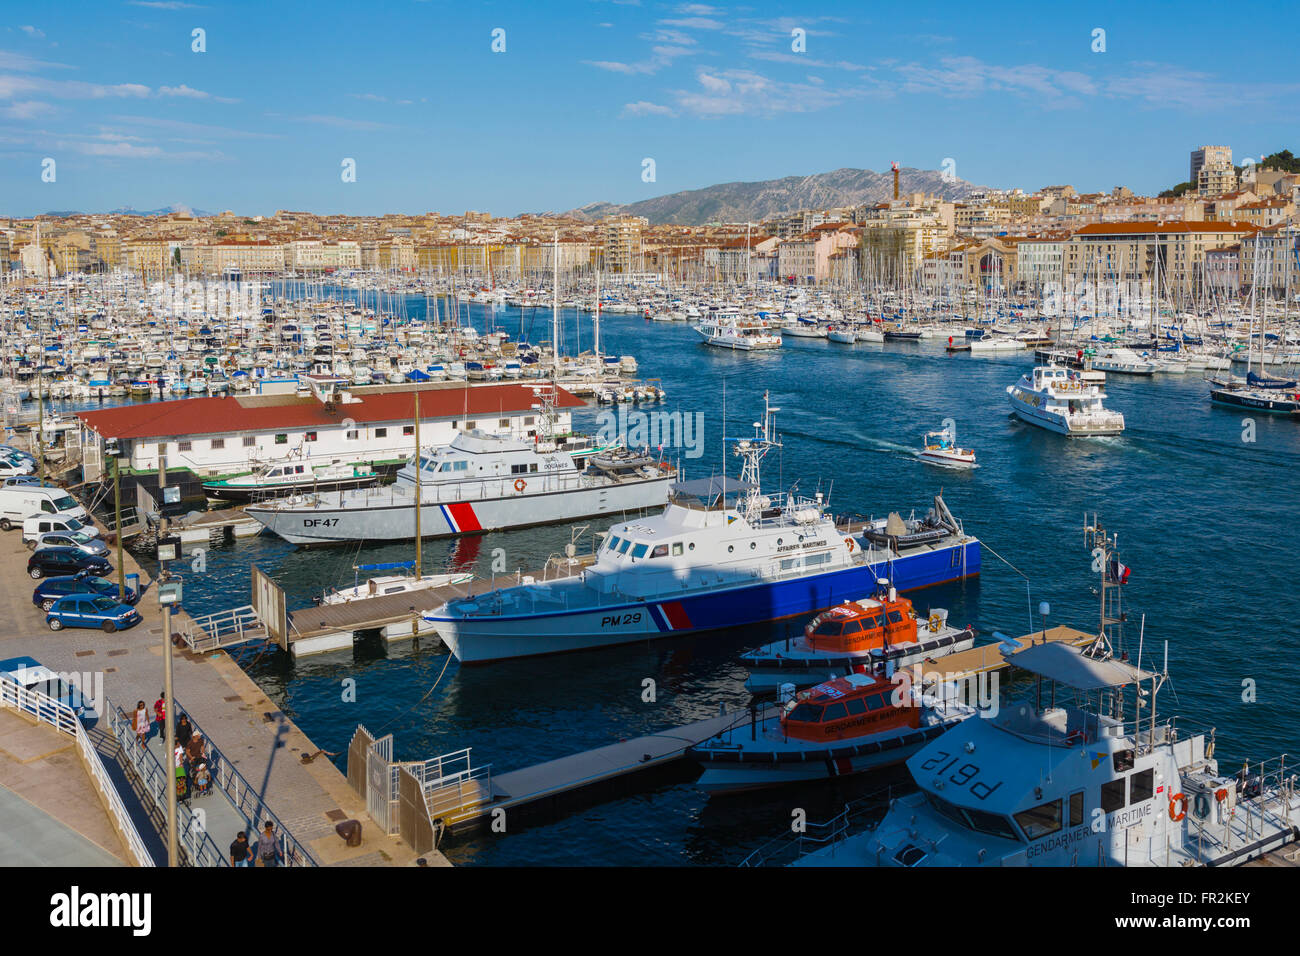 Marseille, Provence-Alpes-Côte d'Azur, France.  High view down onto Vieux-Port, the Old Port, and the city. Stock Photo